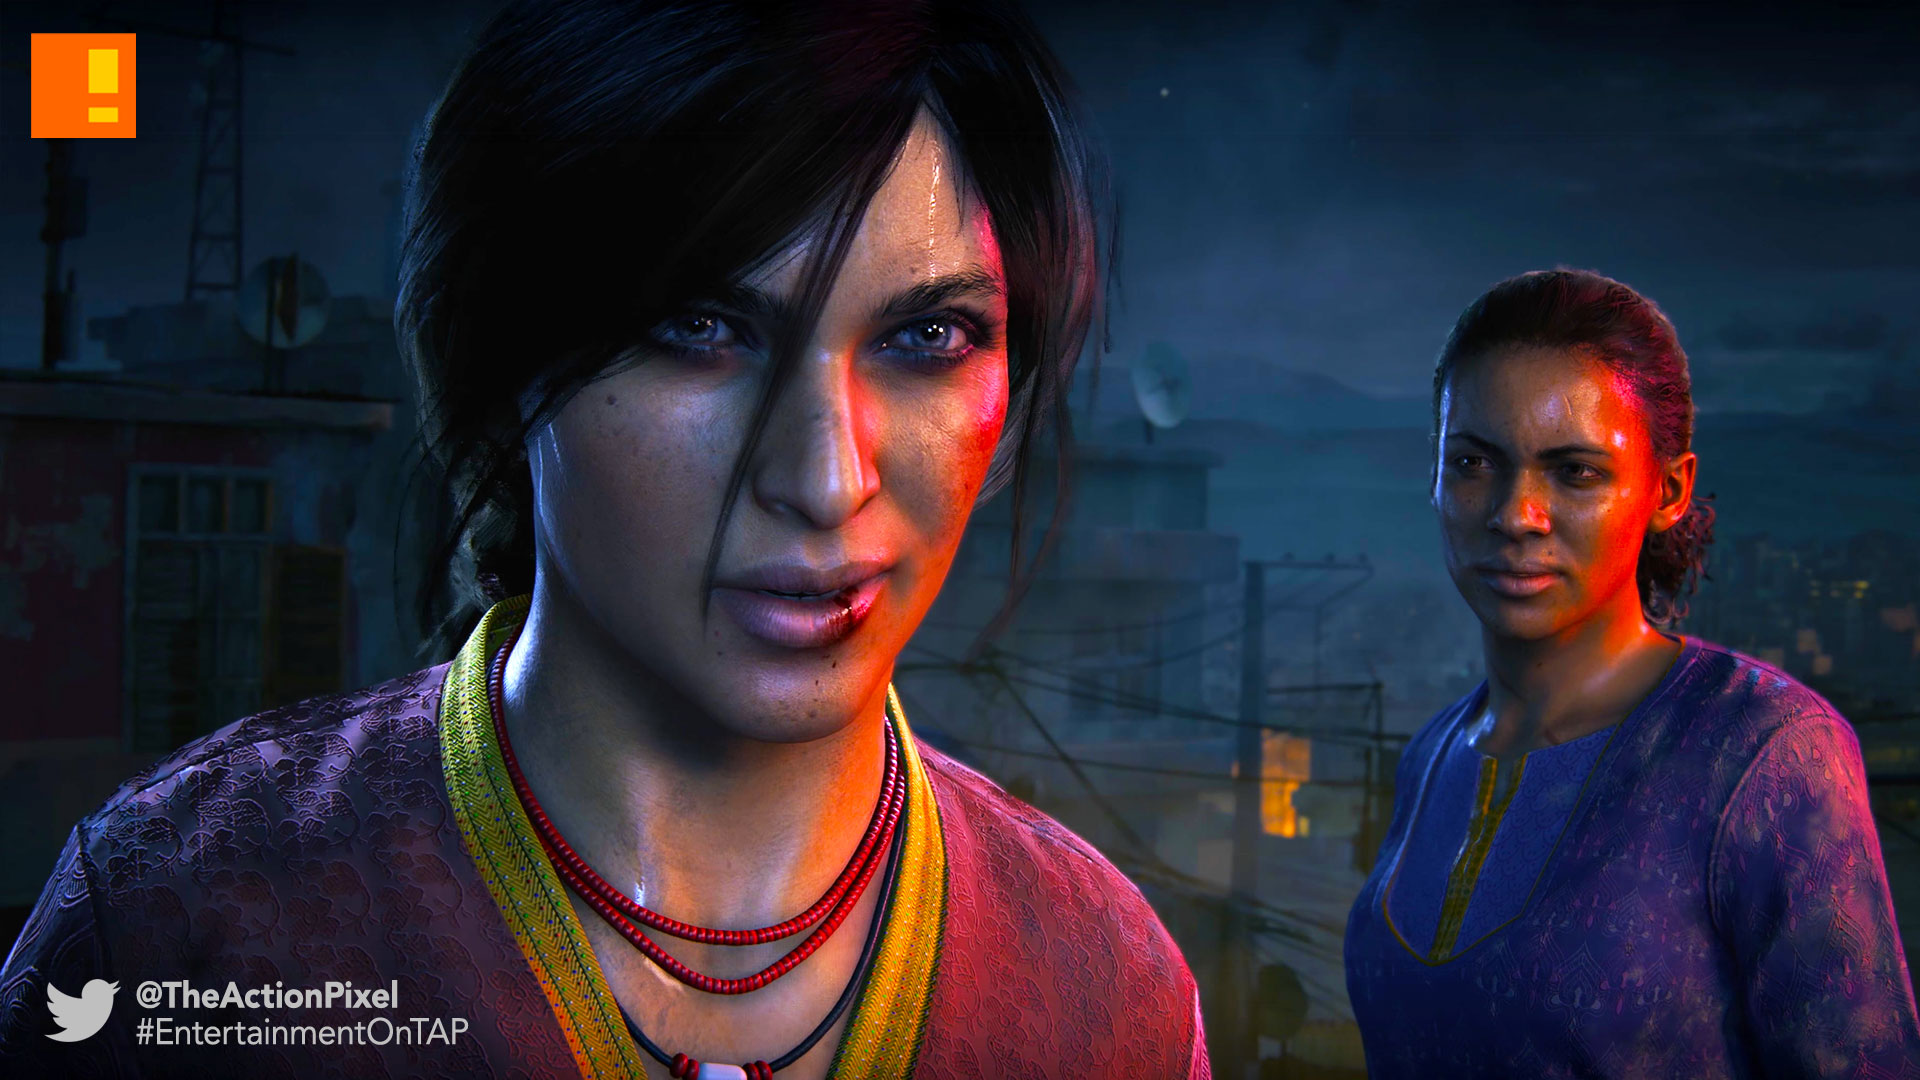 uncharted: the lost legacy, uncharted, the lost legacy, naughty dog, the action pixel, entertainment on tap